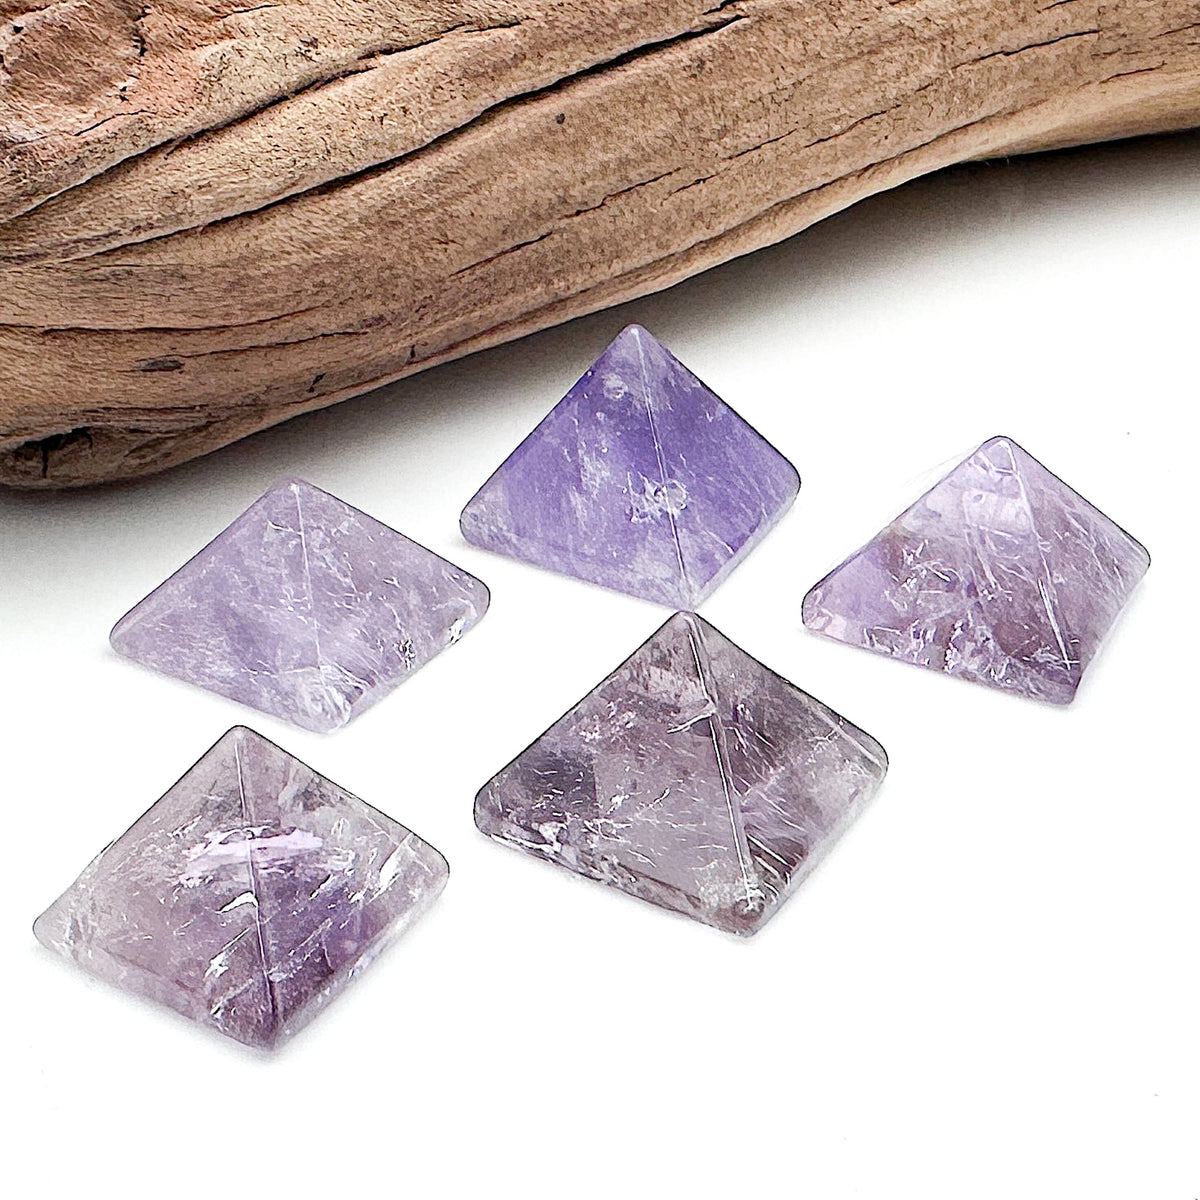 Various amethyst pyramids laid together against a white background